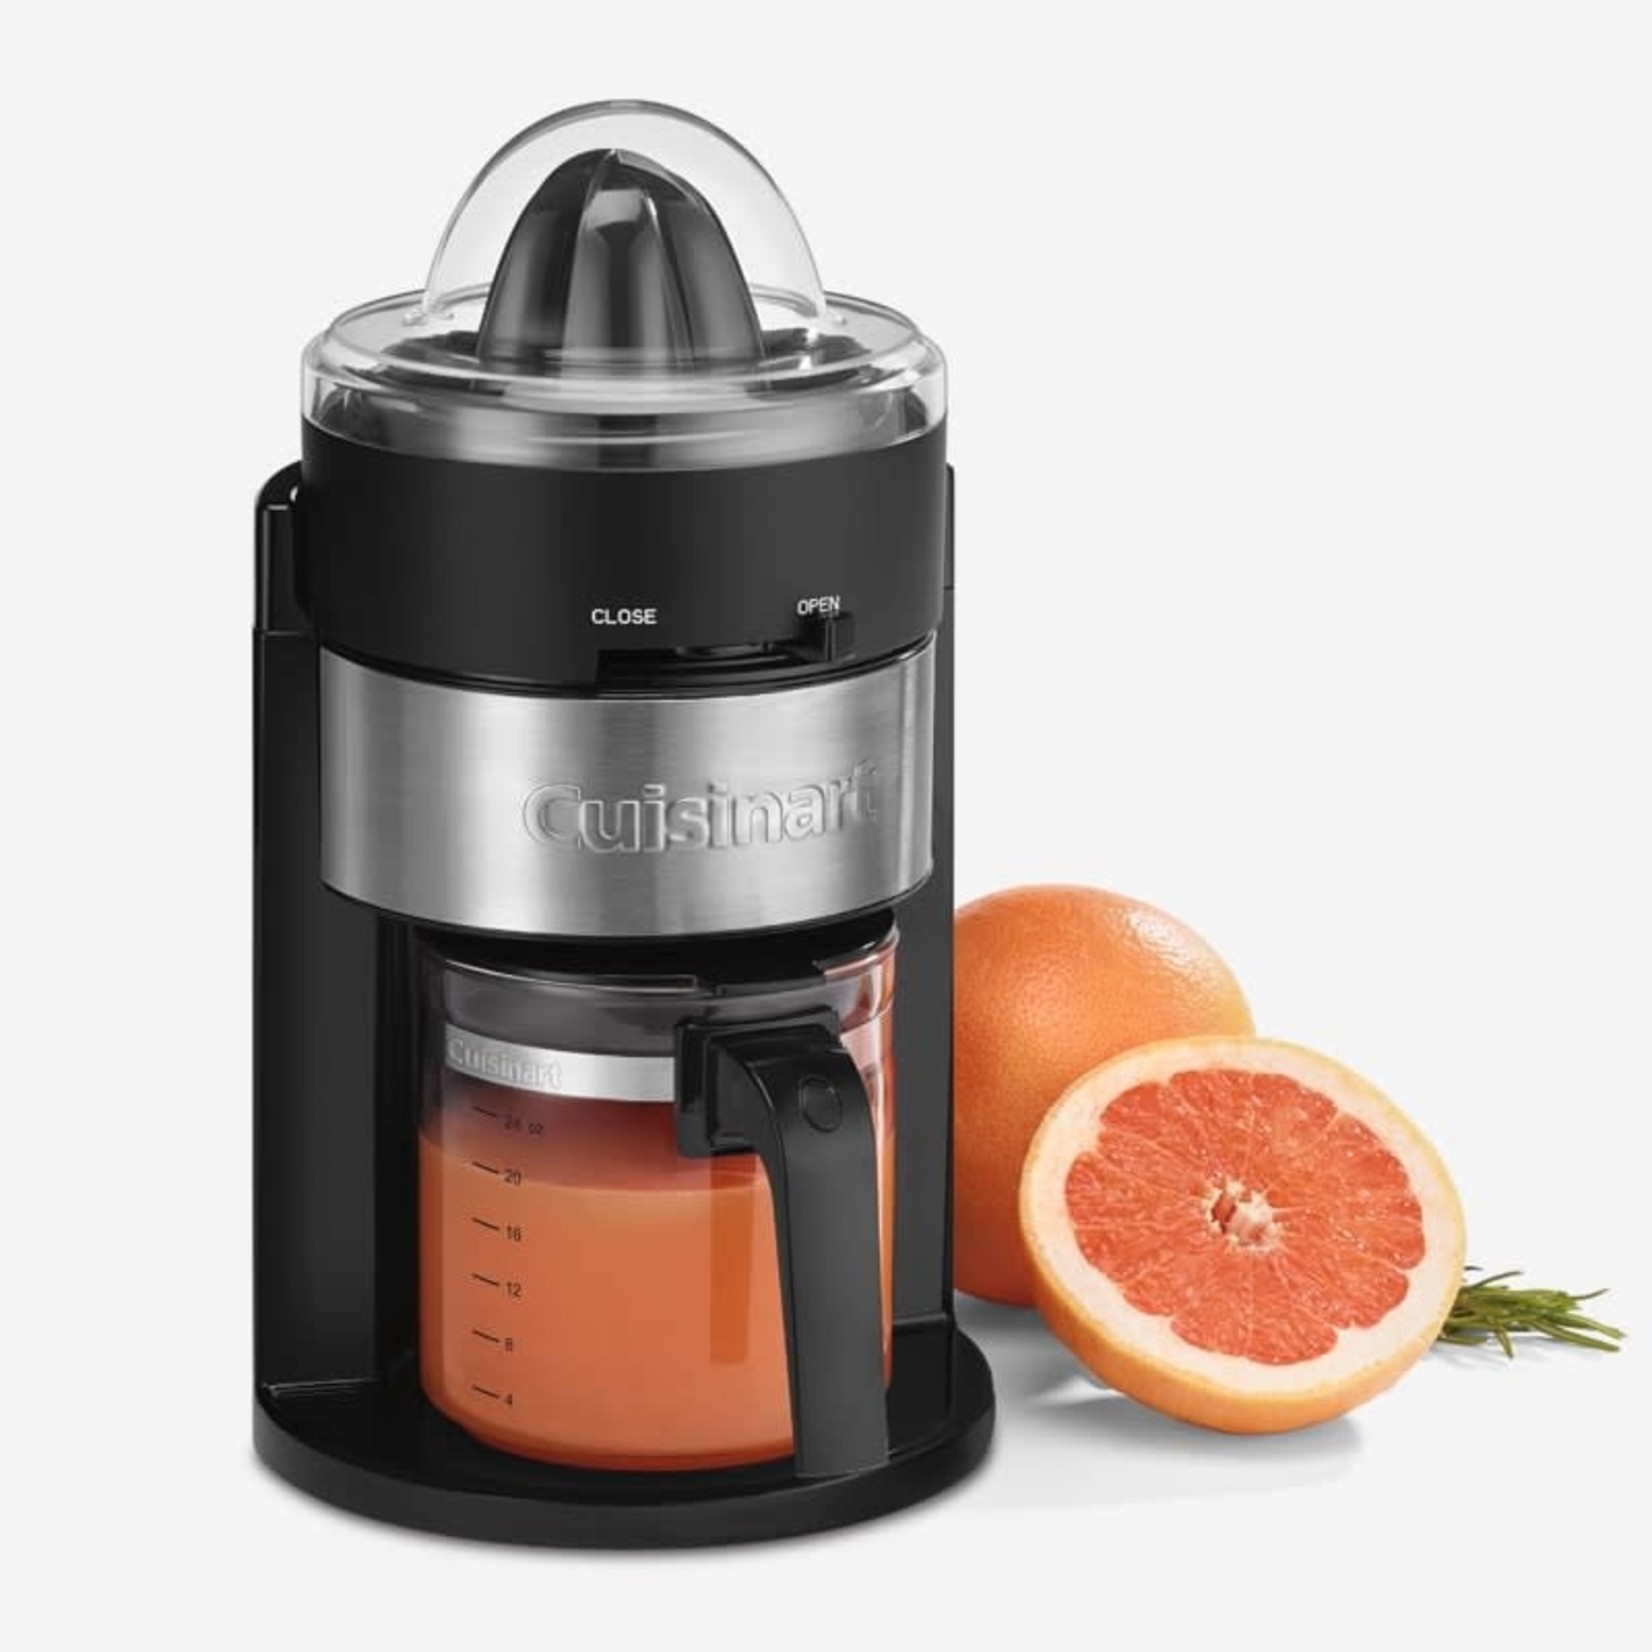 CUISINART CUISINART Juicer with Glass Carafe